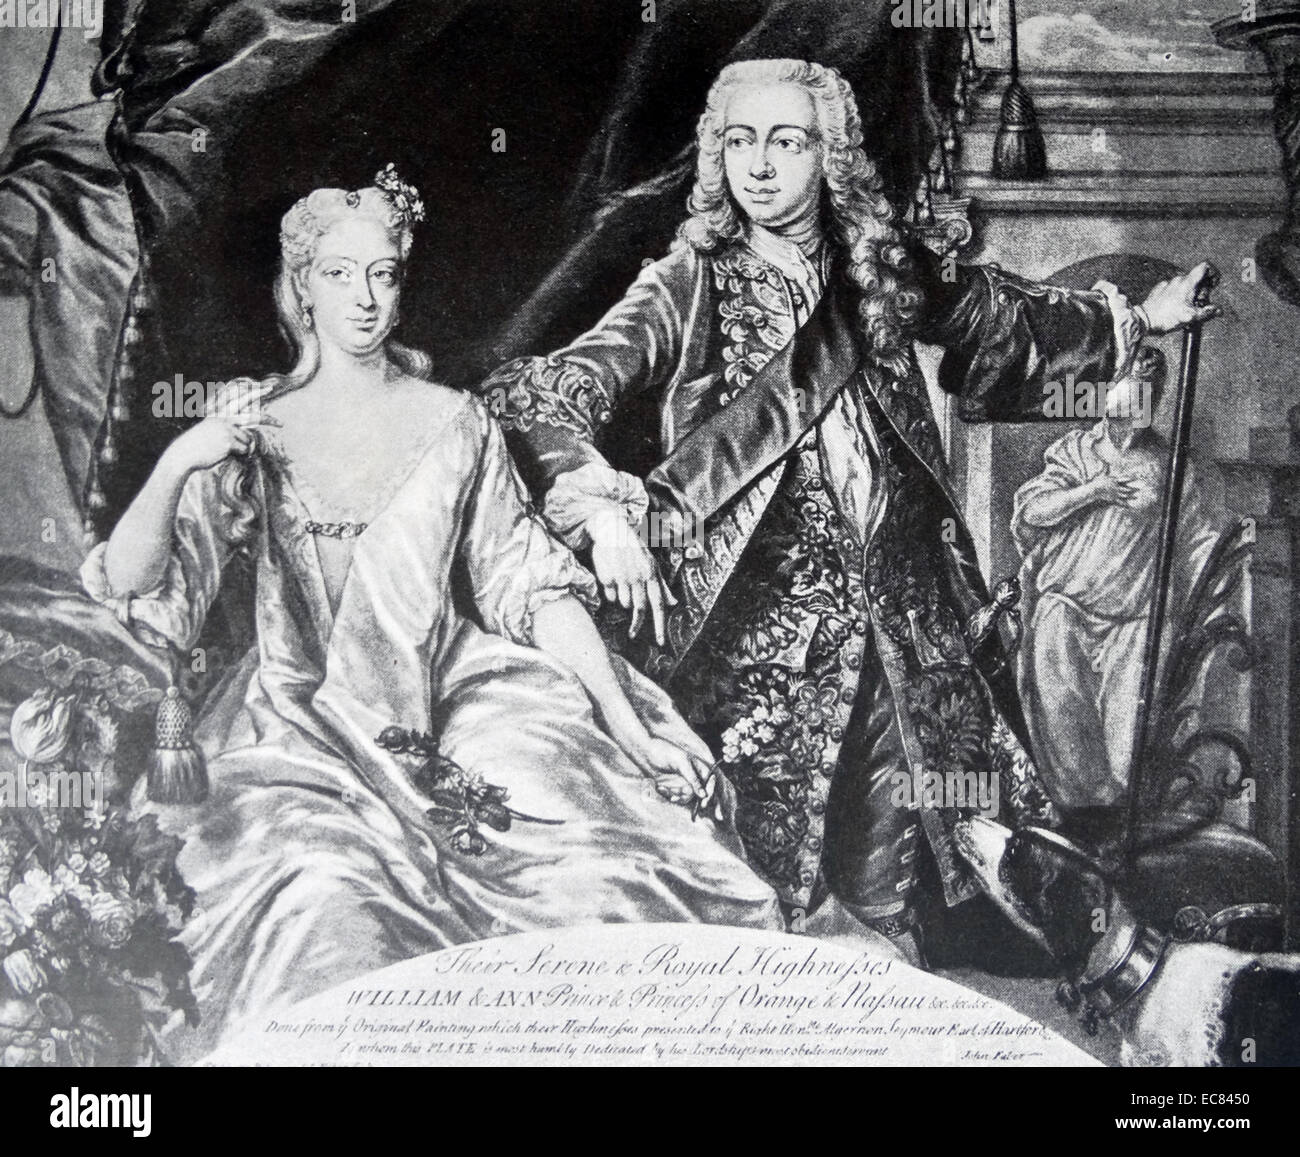 William and Ann; Prince and Princess of Orange and Nassau. Anne; Princess Royal and Princess of Orange (2 November 1709 – 12 January 1759. William IV; Prince of Orange-Nassau (1 September 1711 – 22 October 1751); born Willem Karel Hendrik Friso; was the first hereditary stadtholder of the Netherlands. Stock Photo